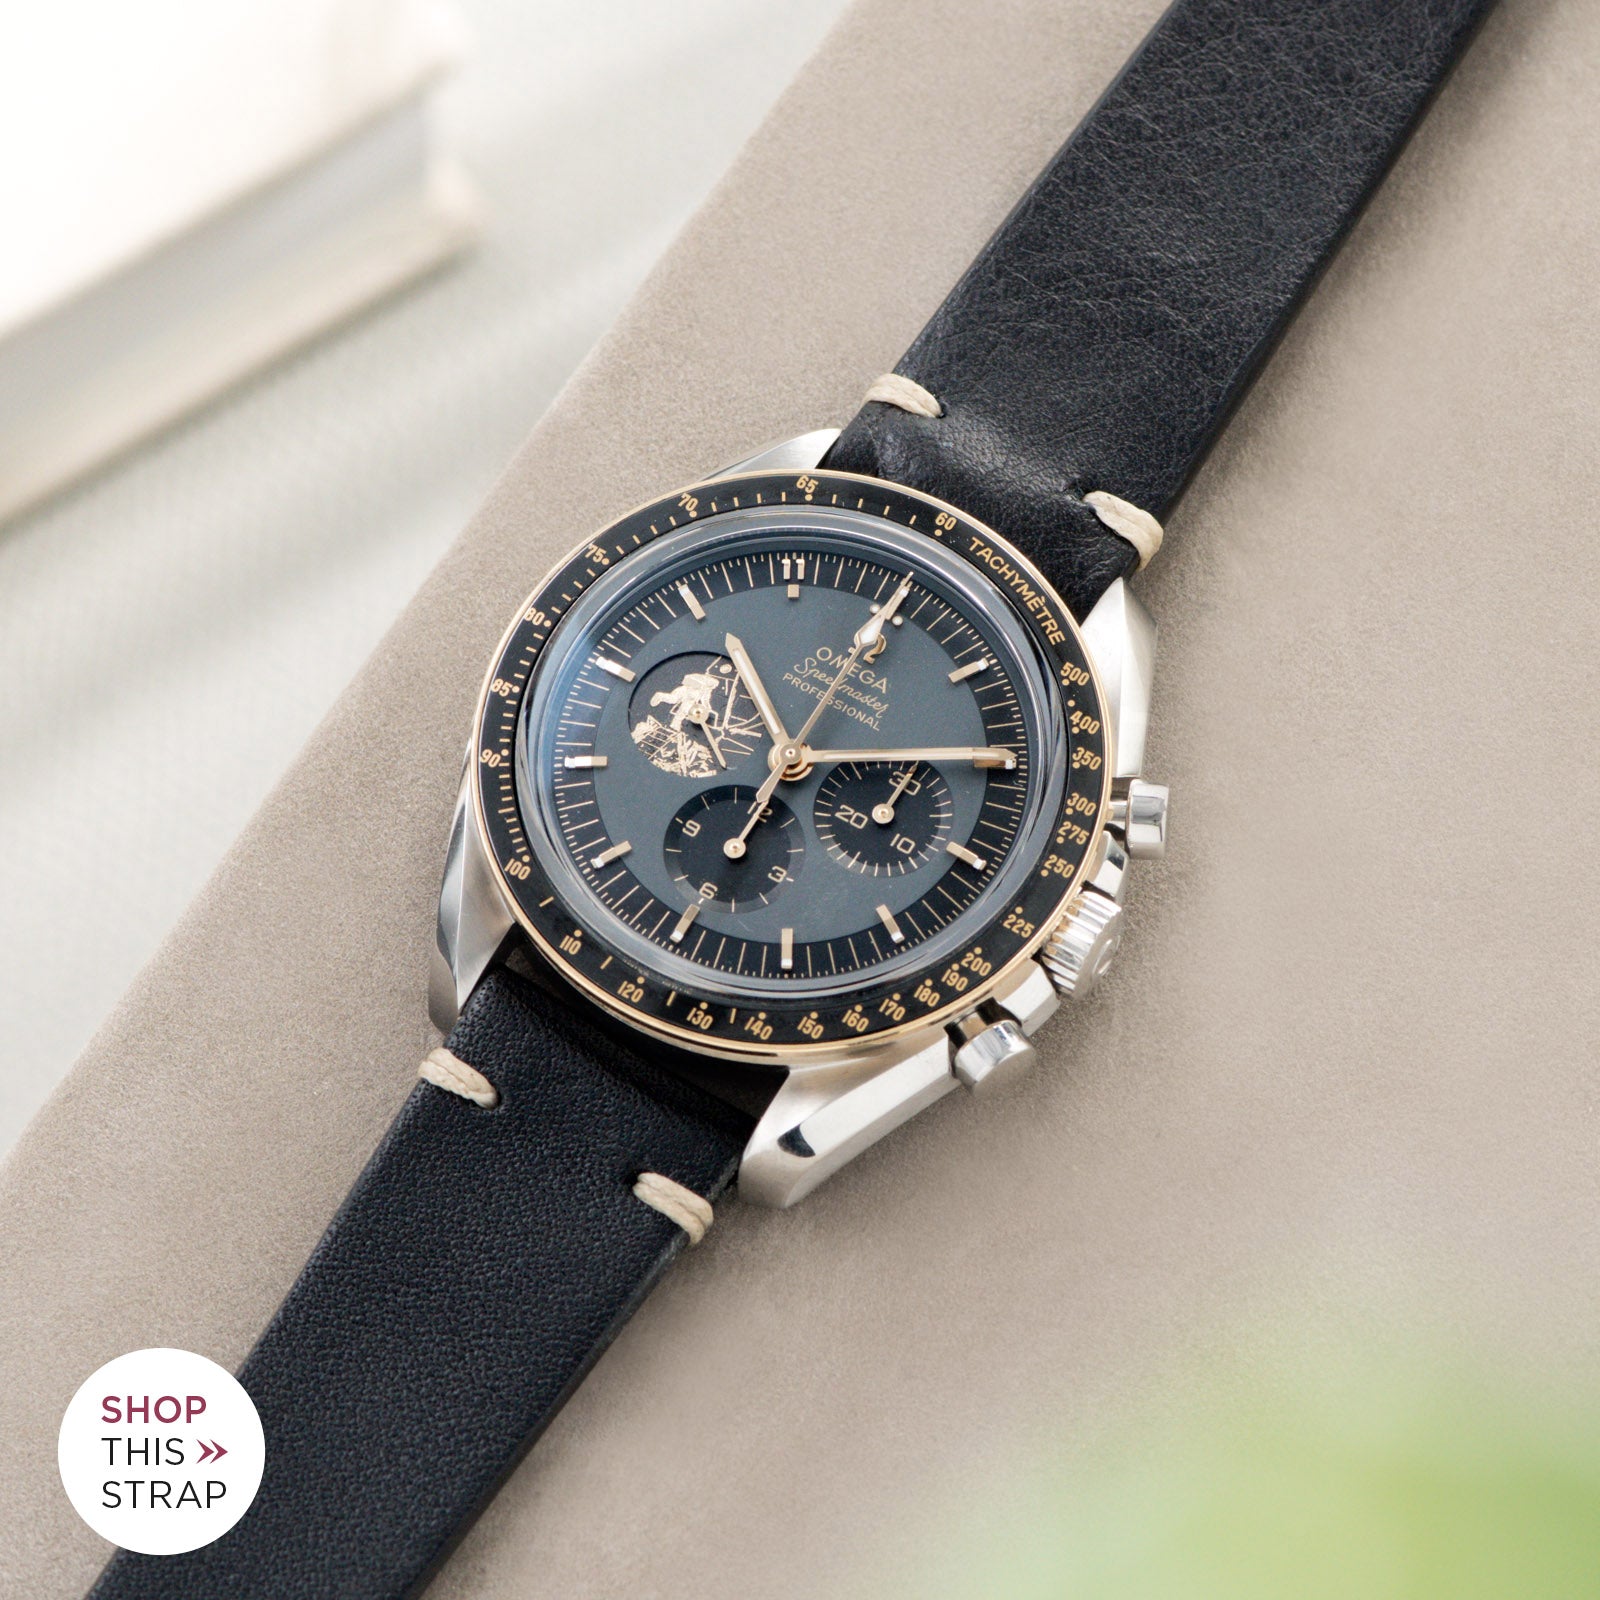 Bulang and Sons_Strap Guide_Omega Speedmaster Apollo 11 50TH Anniversary Watch_Black Leather Watch Strap